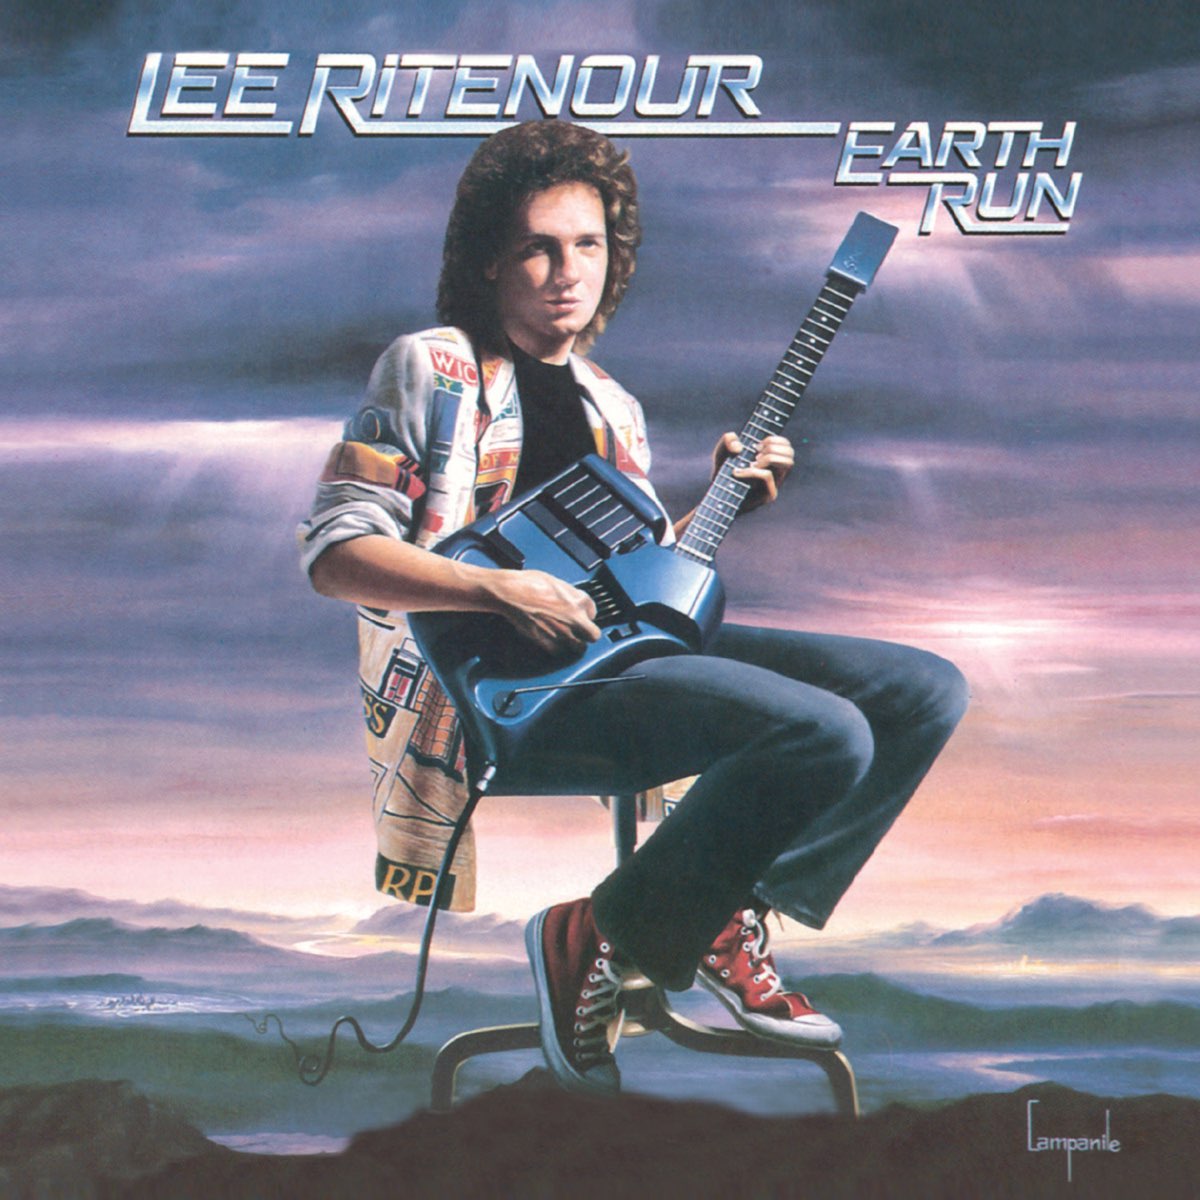 Earth Run (Remastered) by Lee Ritenour on Apple Music